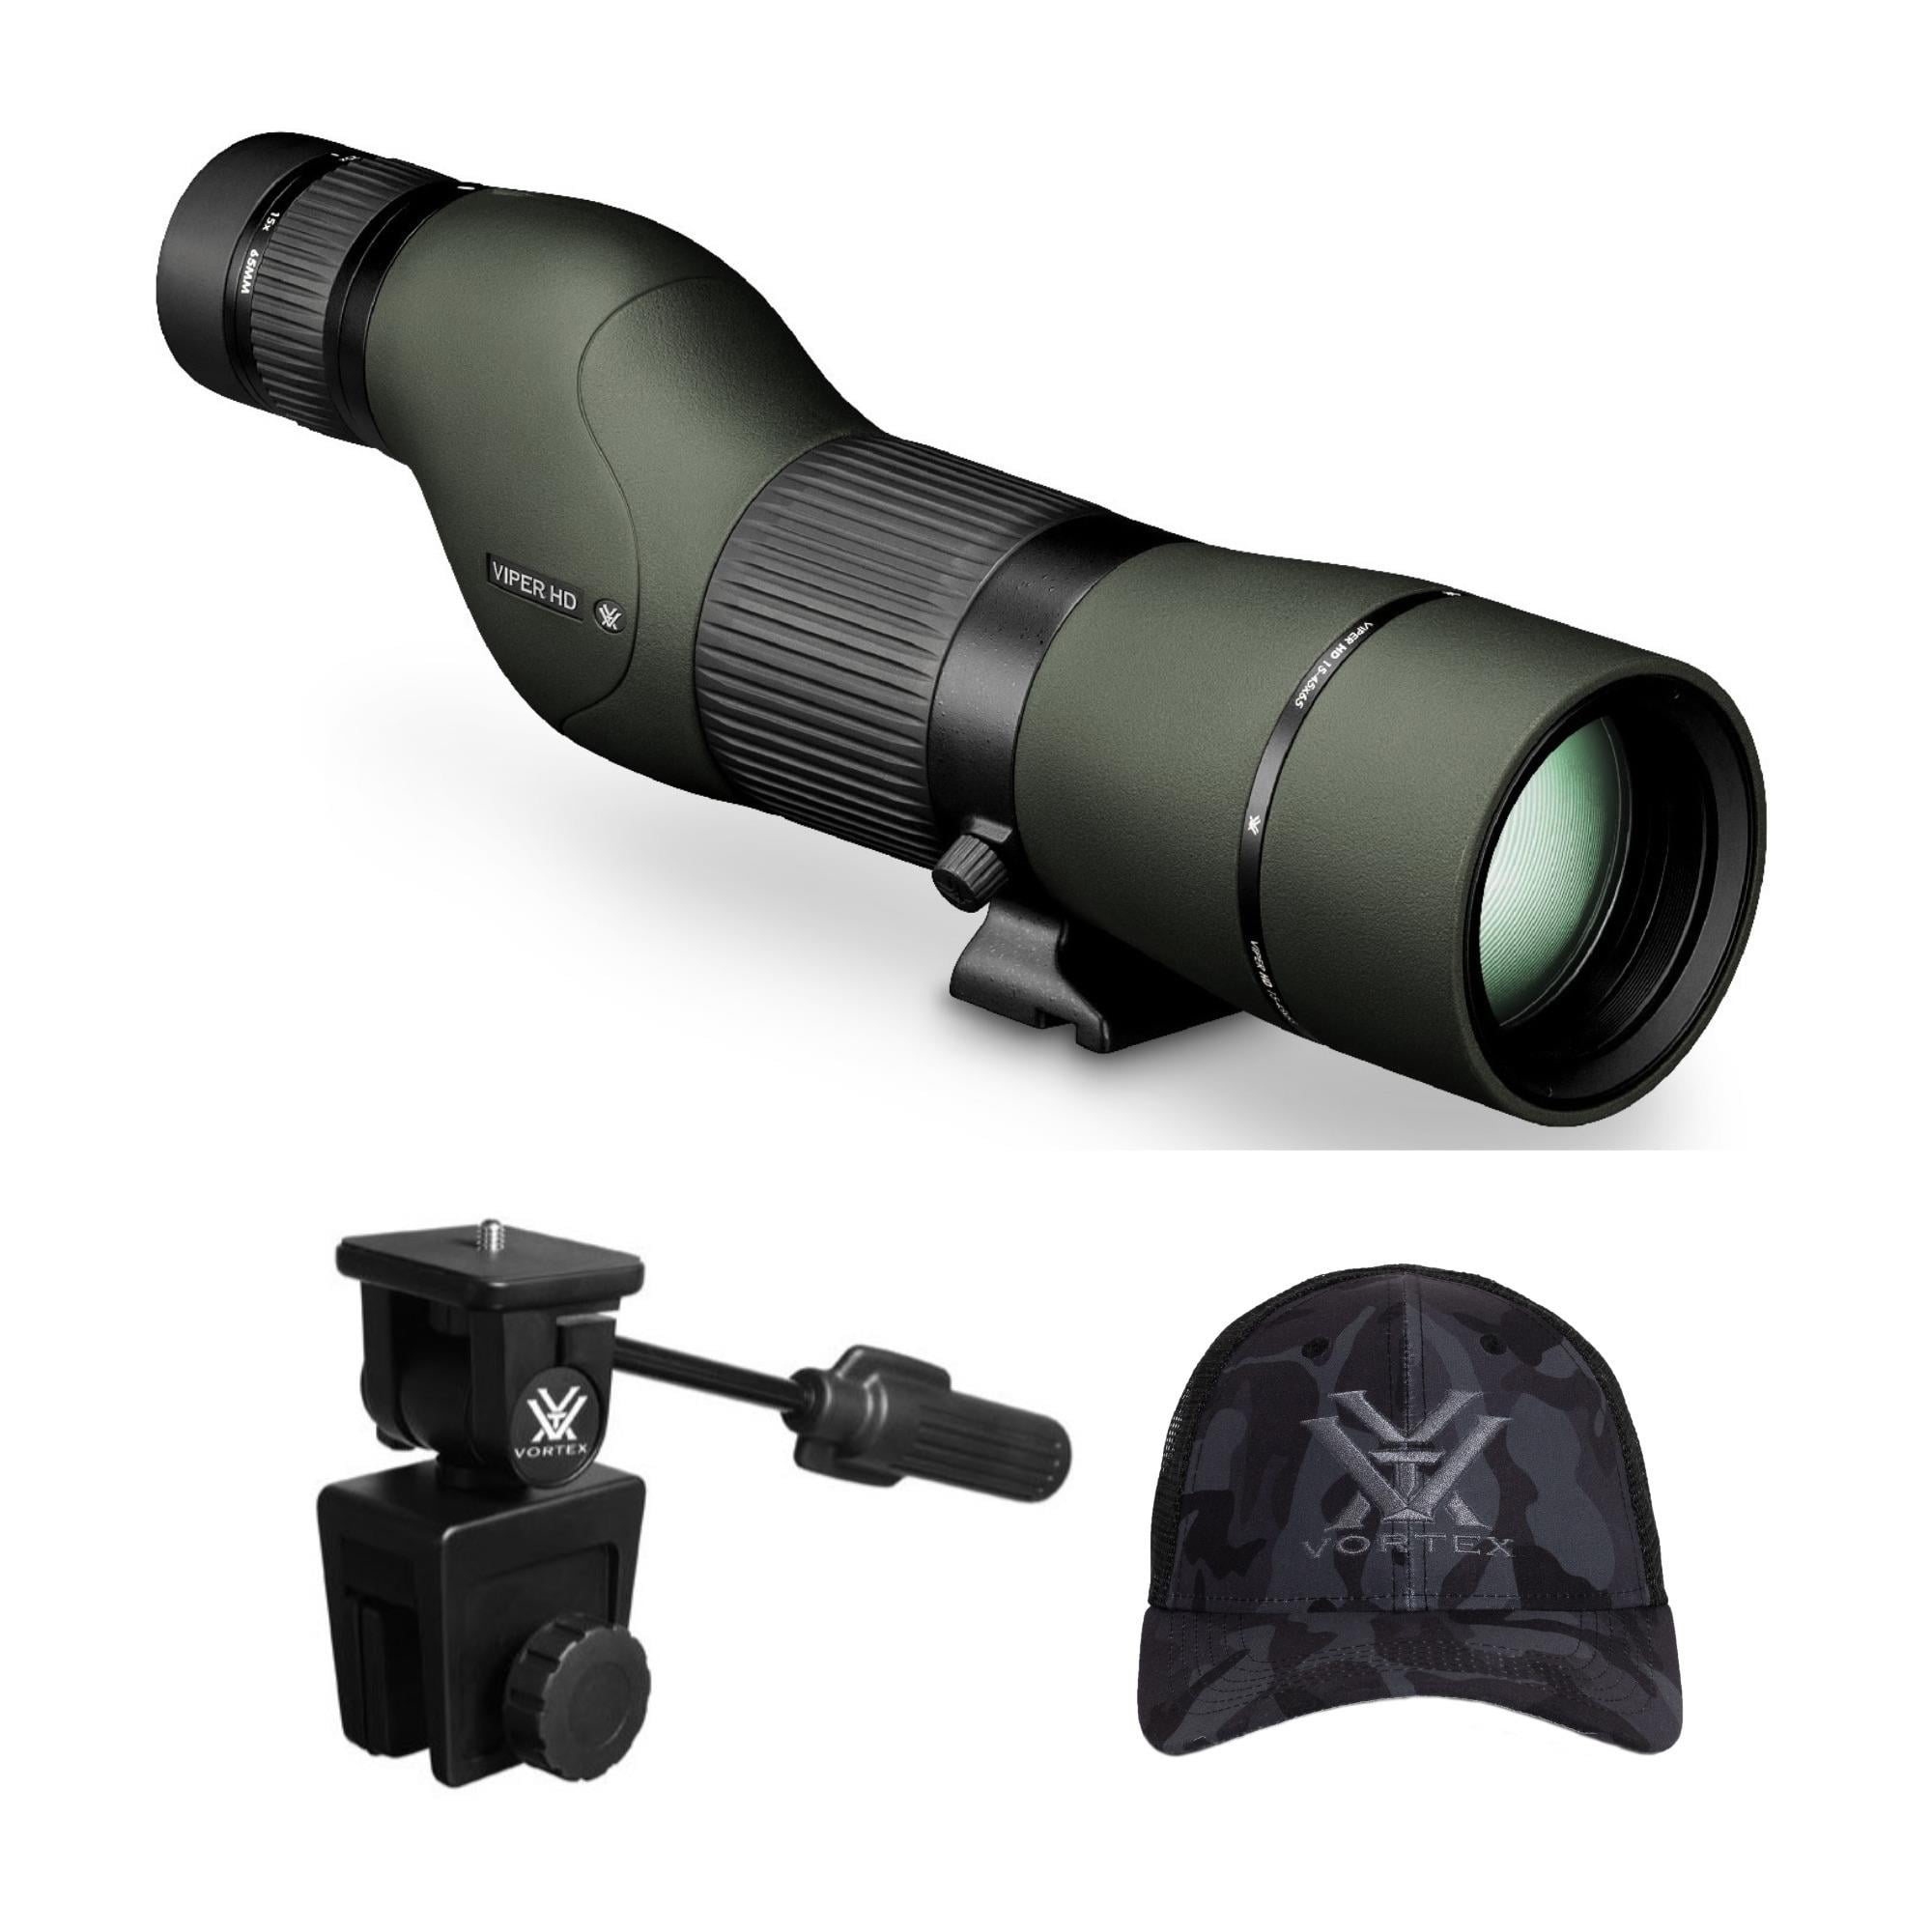 straight With Hc-2 Tripod and Hat for sale online Vortex Viper HD 15-45x65 Spotting Scope 